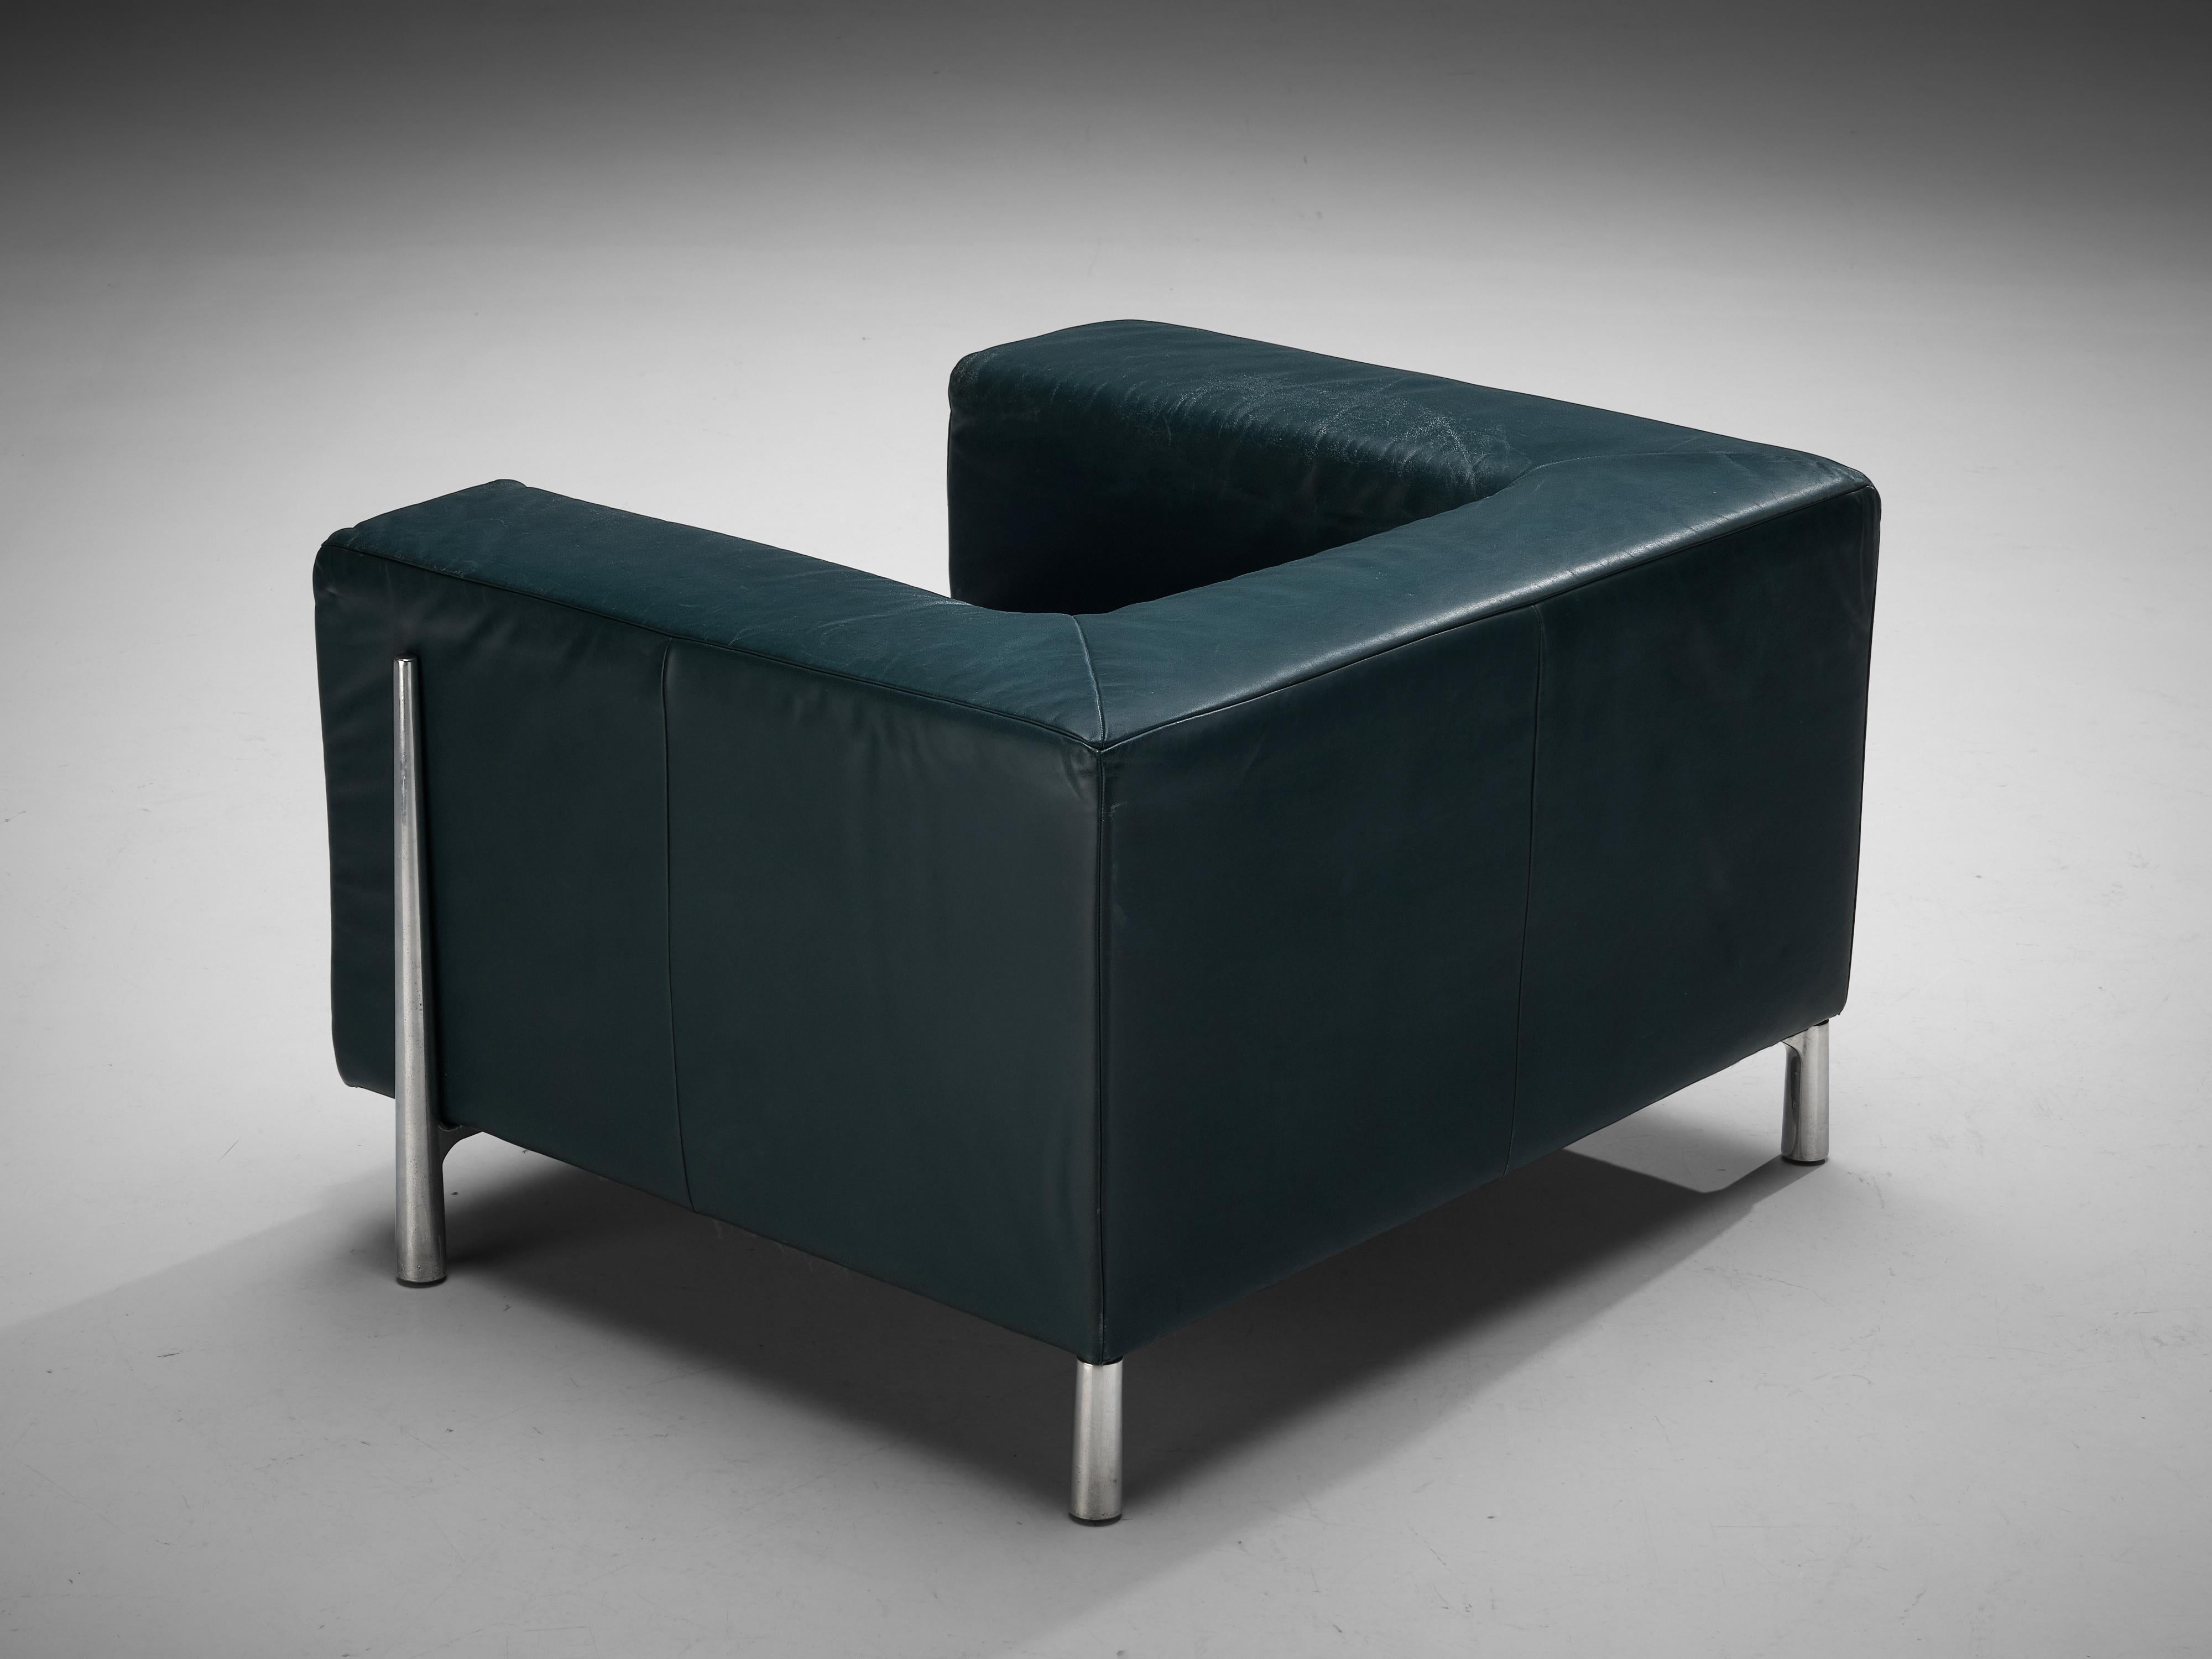 European Large Cubic Lounge Chair in Green Leather